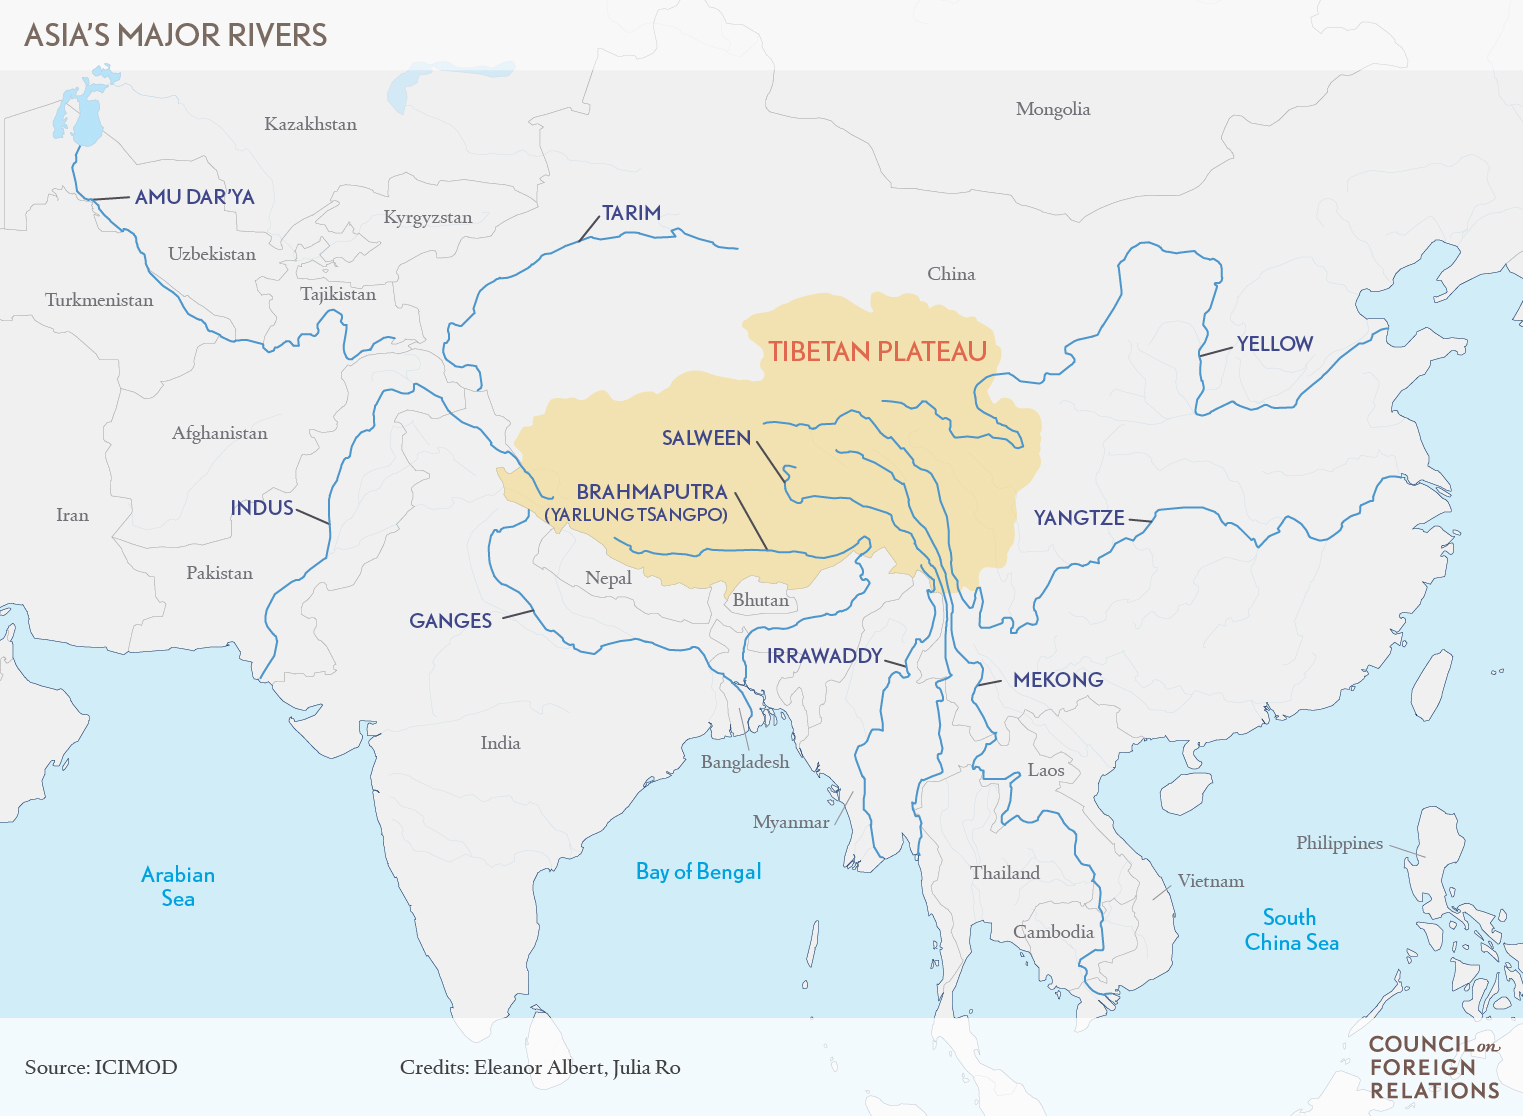 Asia's major rivers